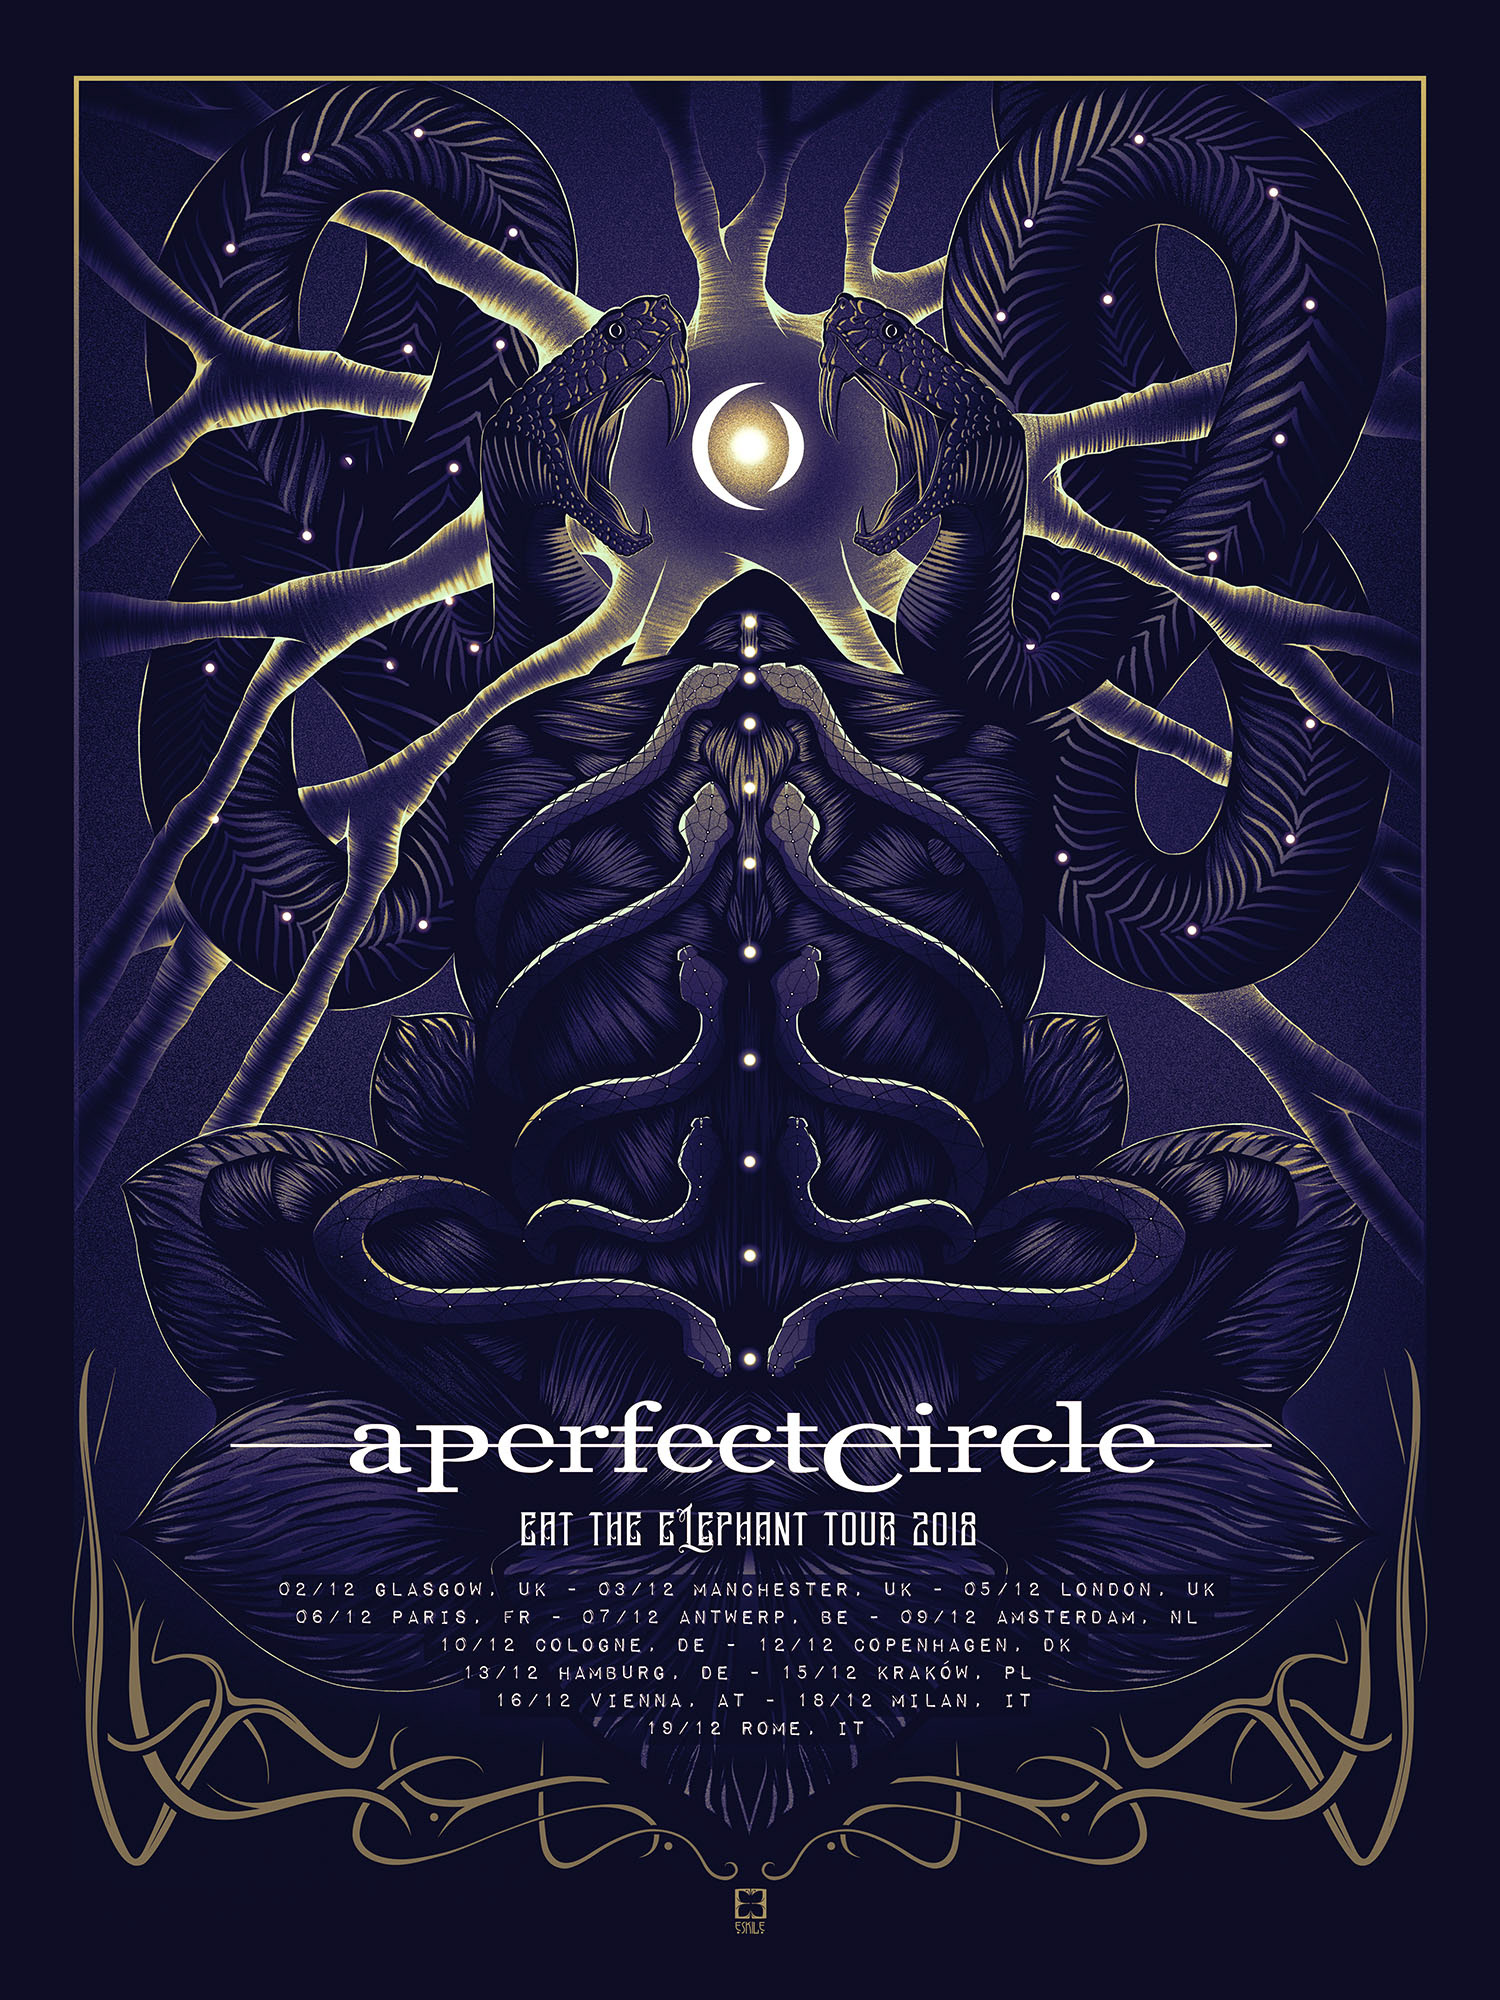 does a perfect circle still tour